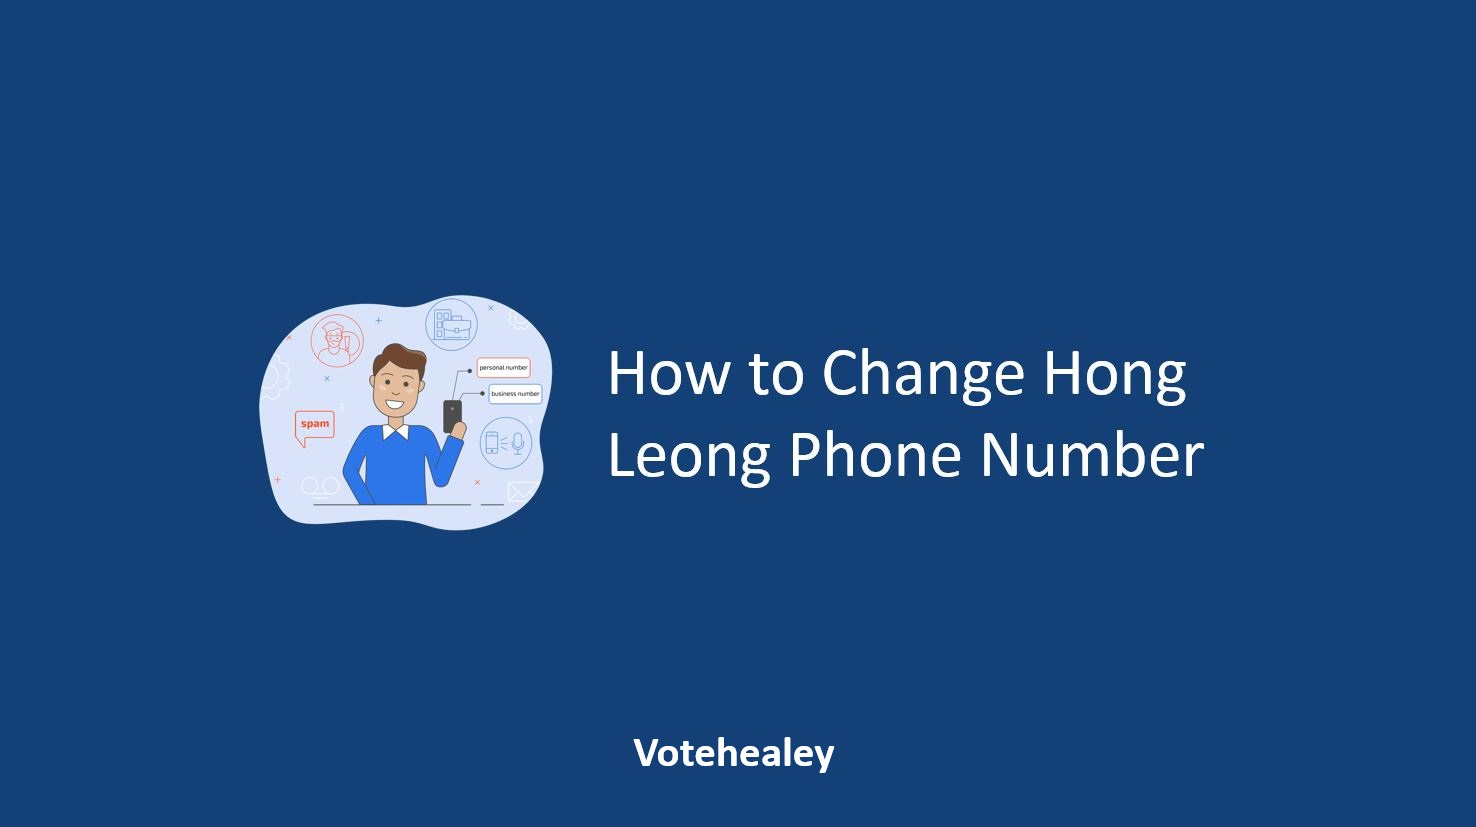 How to Change Hong Leong Phone Number